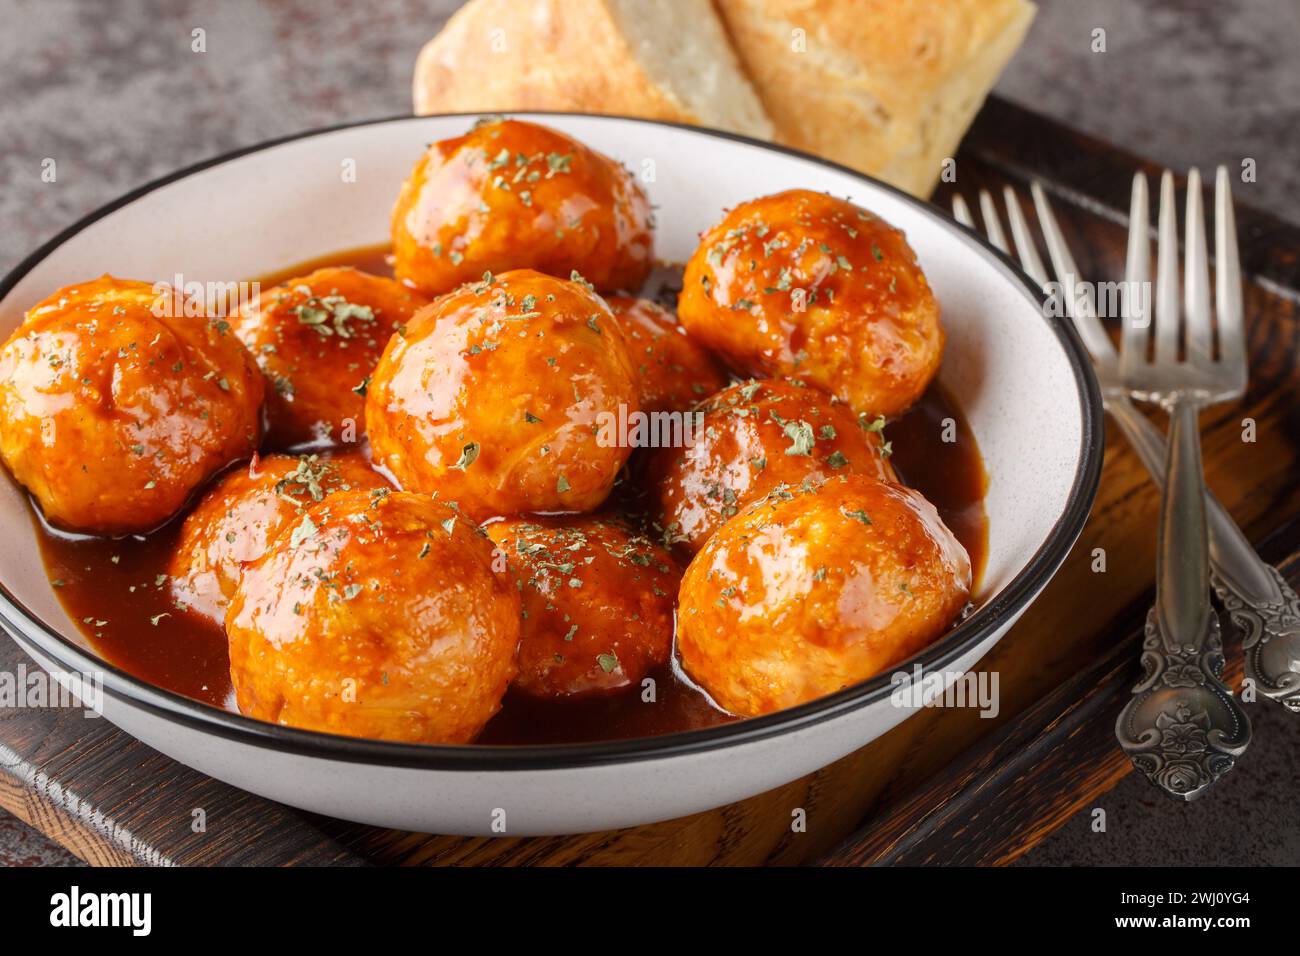 Baked meatballs are coated in a sweet and spicy honey chipotle sauce closeup on the bowl on the table. Horizontal Stock Photo